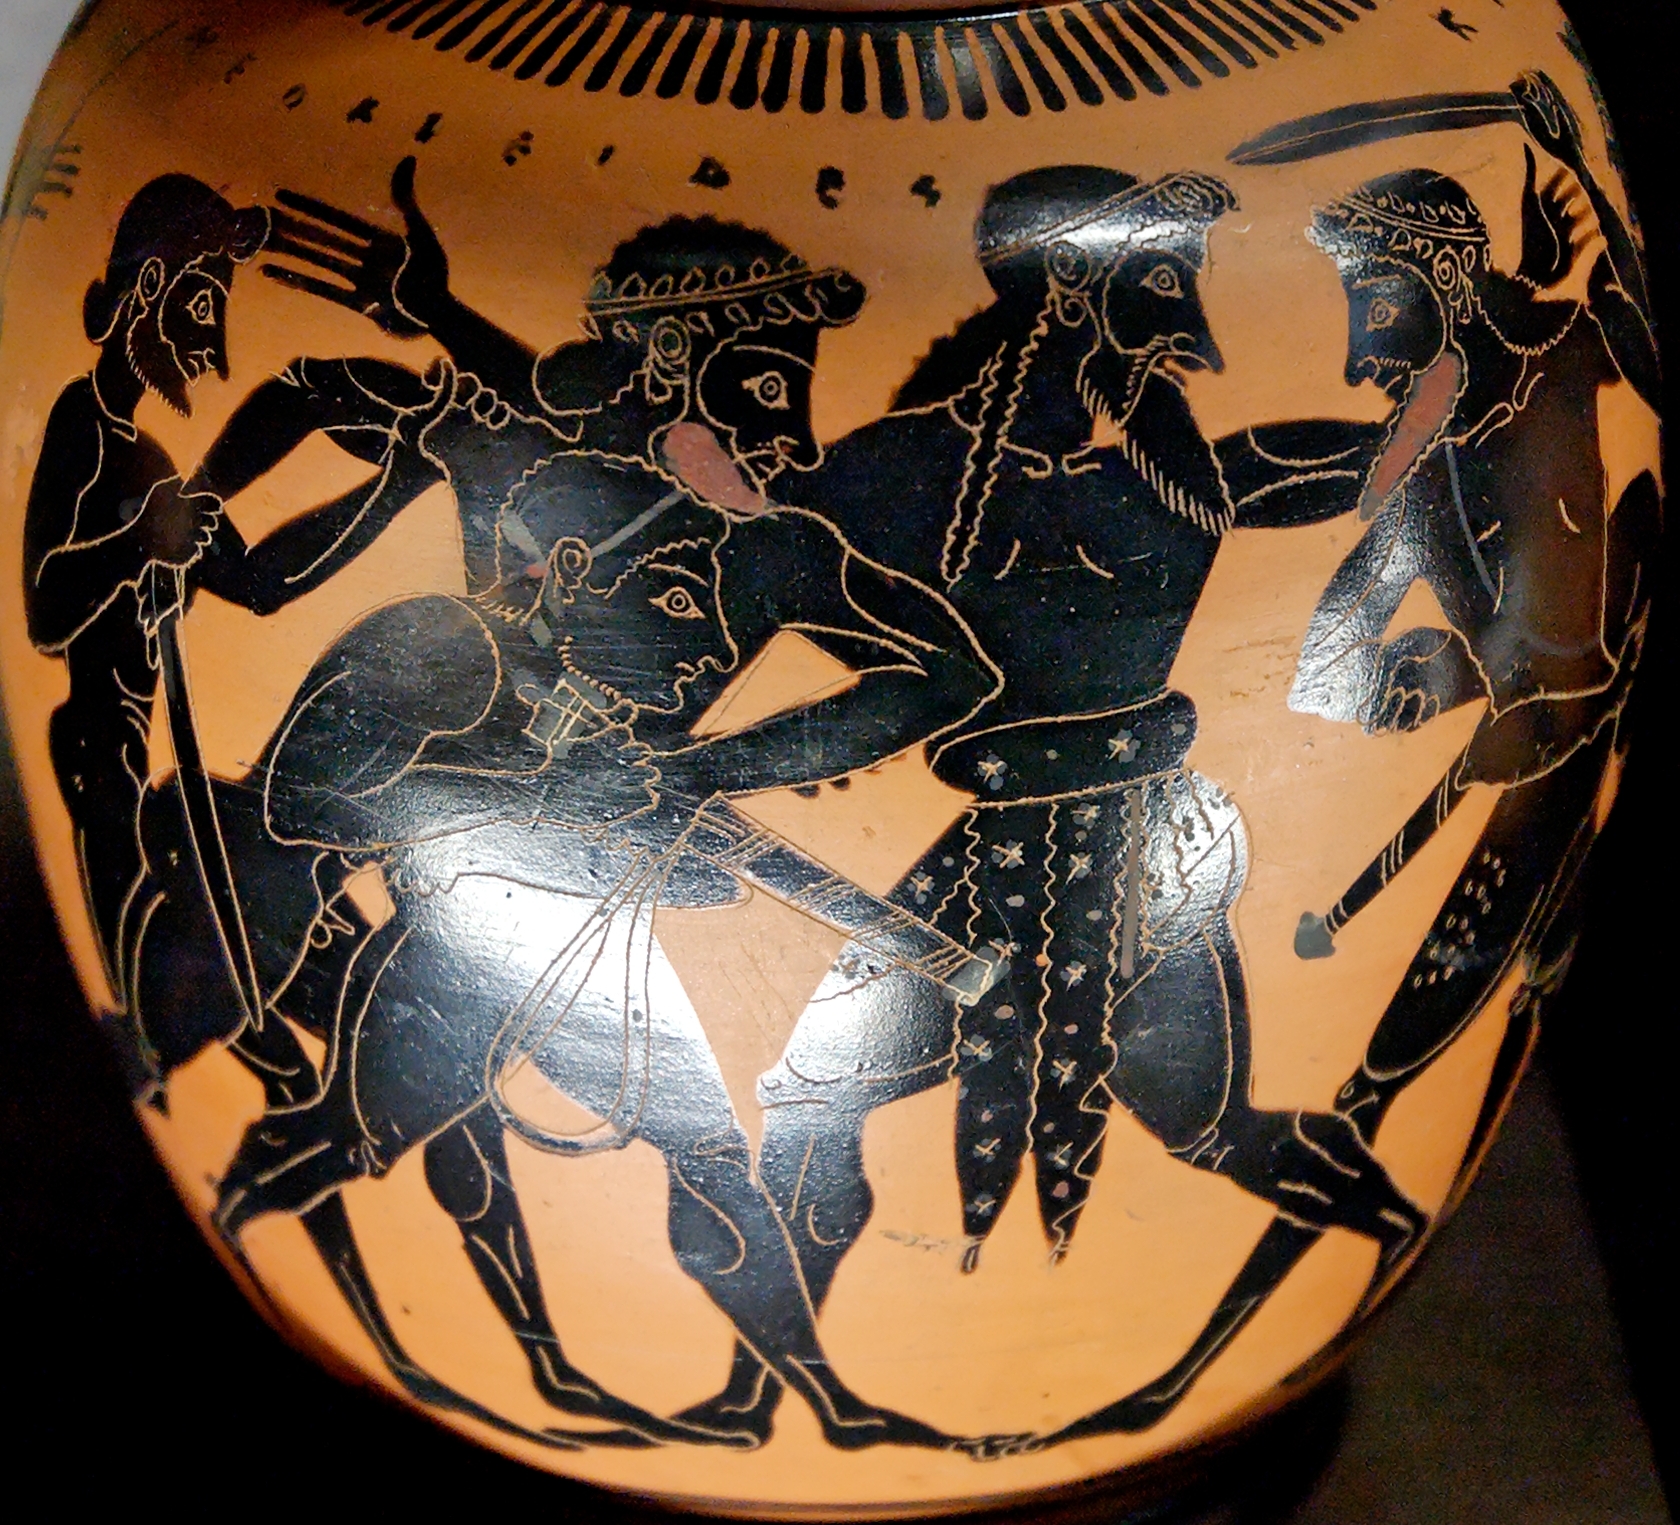 Agamemnon stands between Ajax and Odysseus, who lunge at each other. Two other warriors also grab at them, either holding back or participating in the fight.